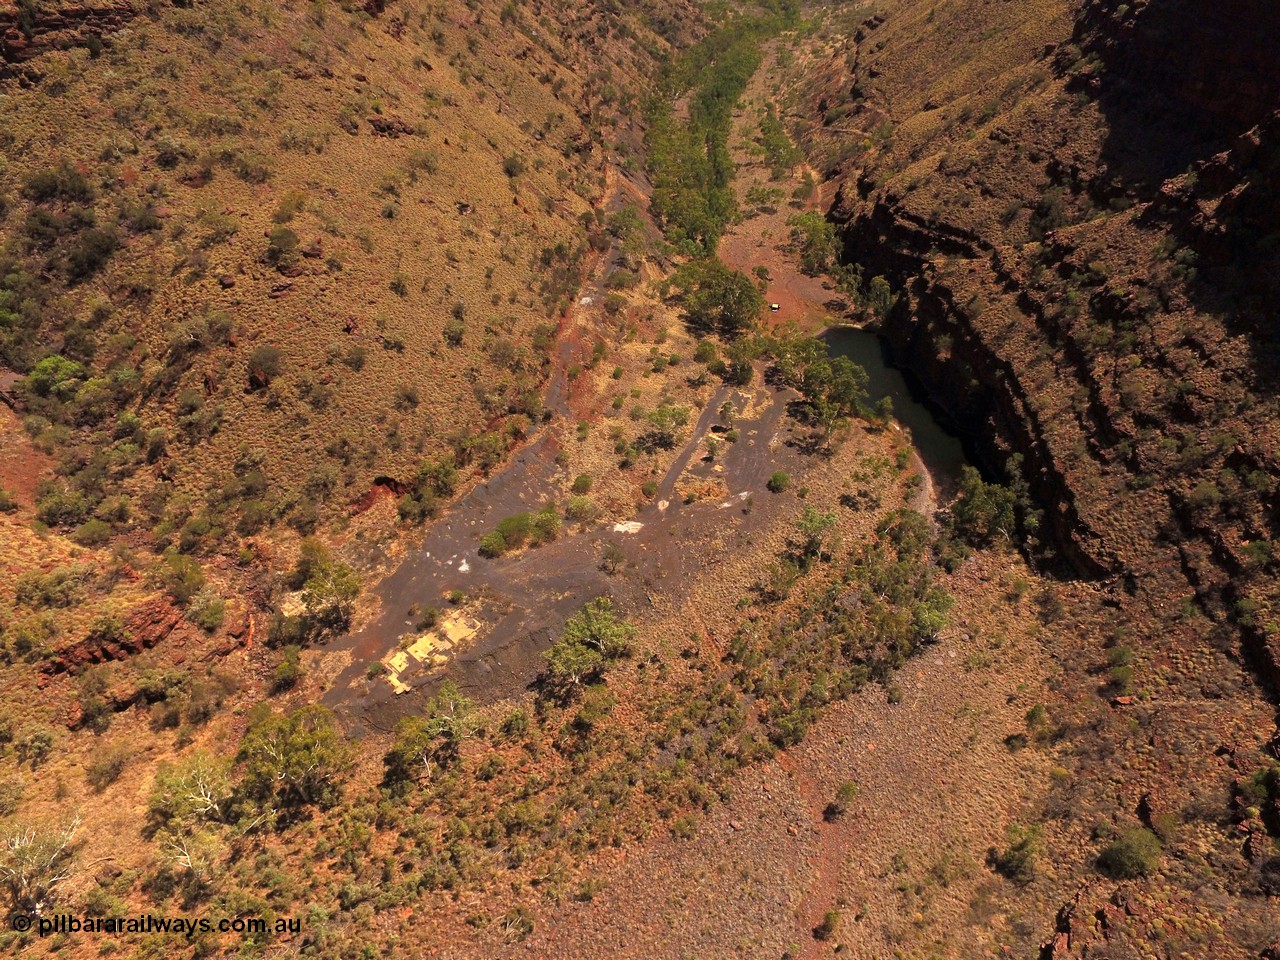 160101 DJI 0017
Wittenoom Gorge, view from above the Gorge Mine area and pool, looking north east, campers at pool, the drive can be seen cutting up the left side of the gorge, foot print of mine and building area clearly visible. [url=https://goo.gl/maps/tFzc7cw2fpB3MDRP9]Geodata[/url].
